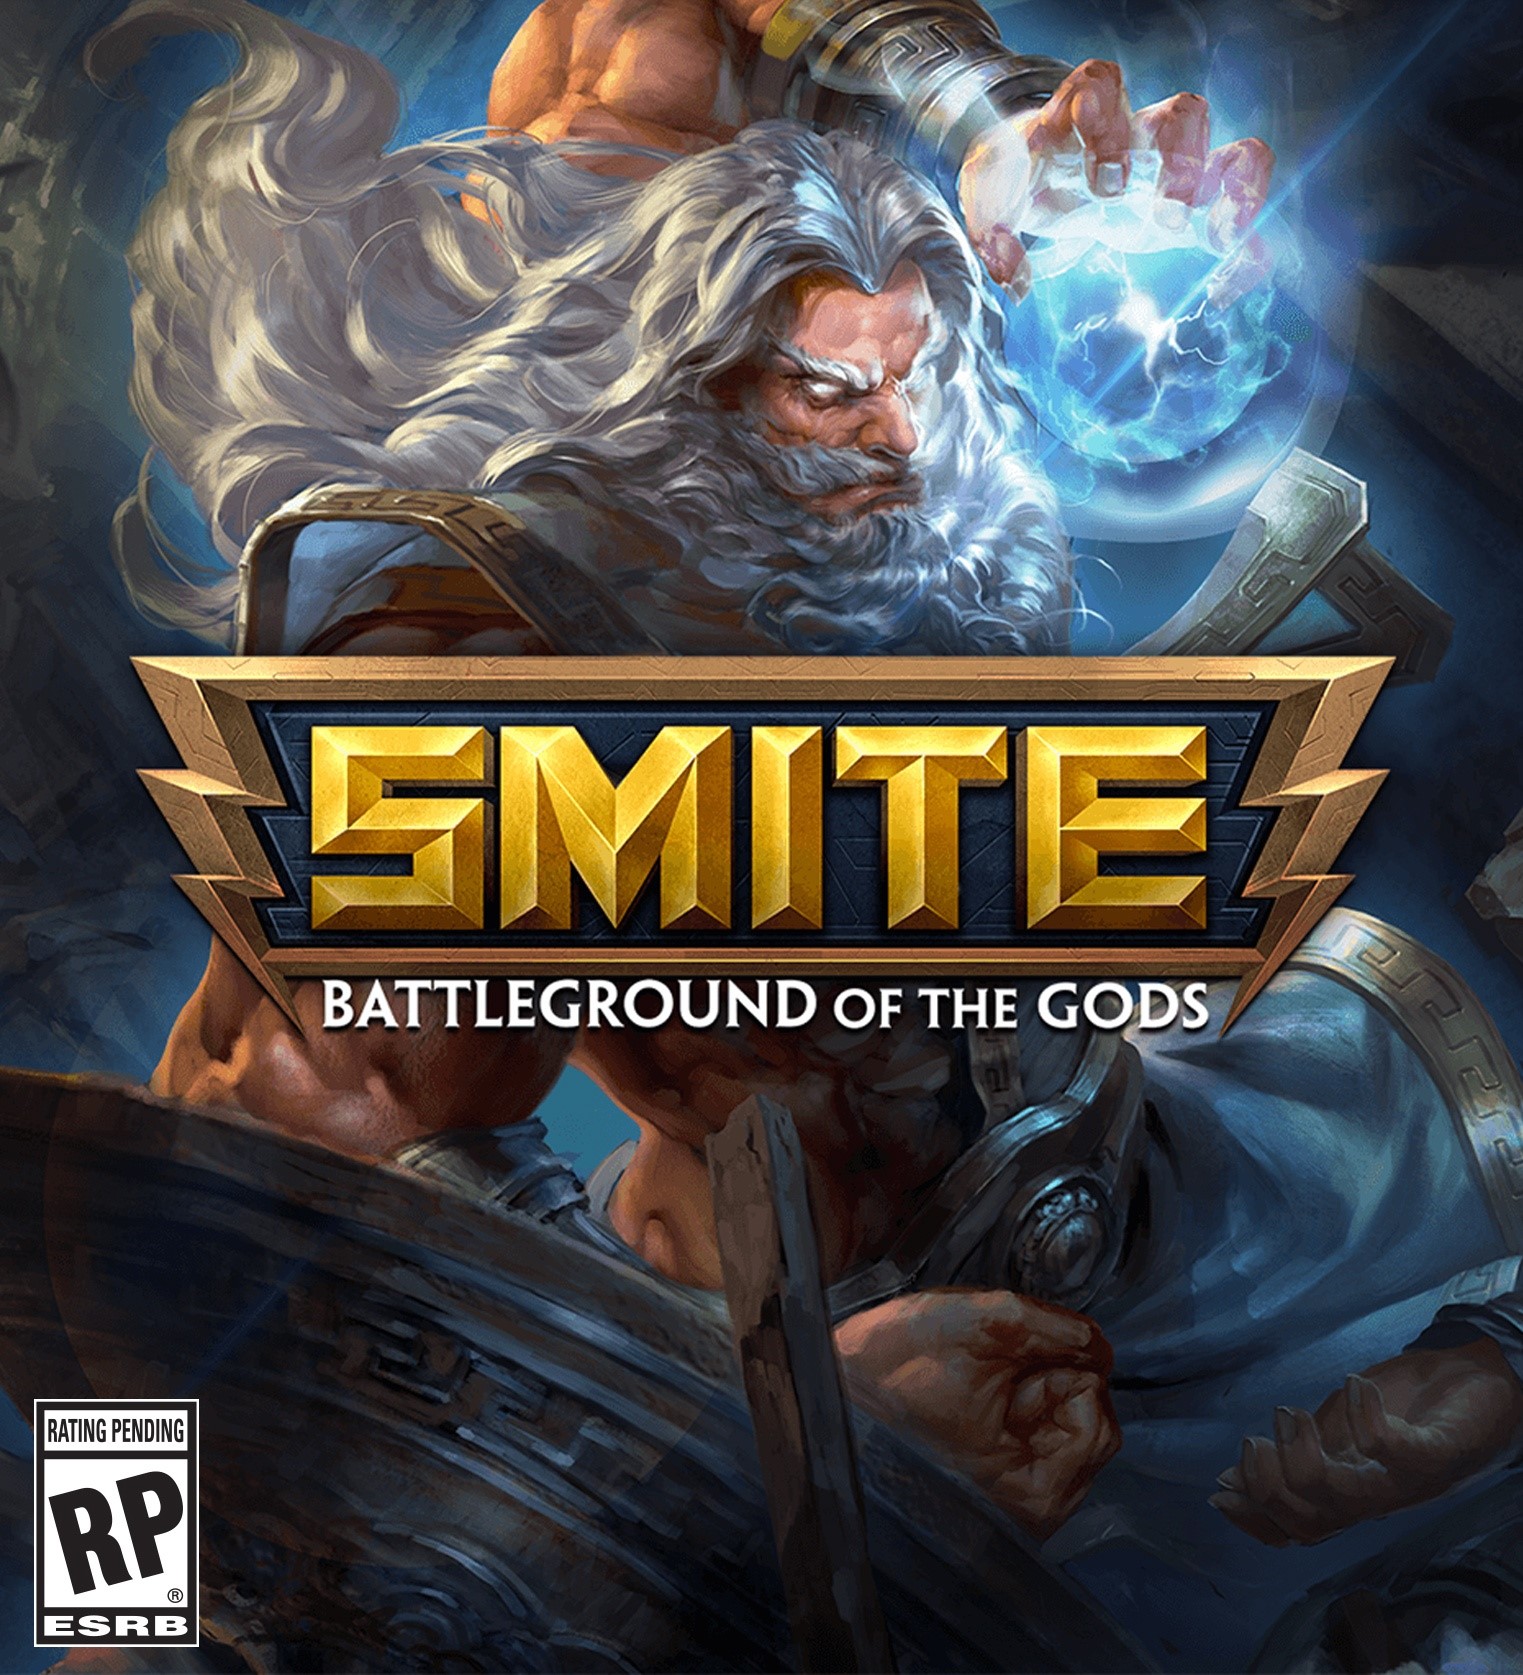 SMITE - 3 Day Account Booster CD Key